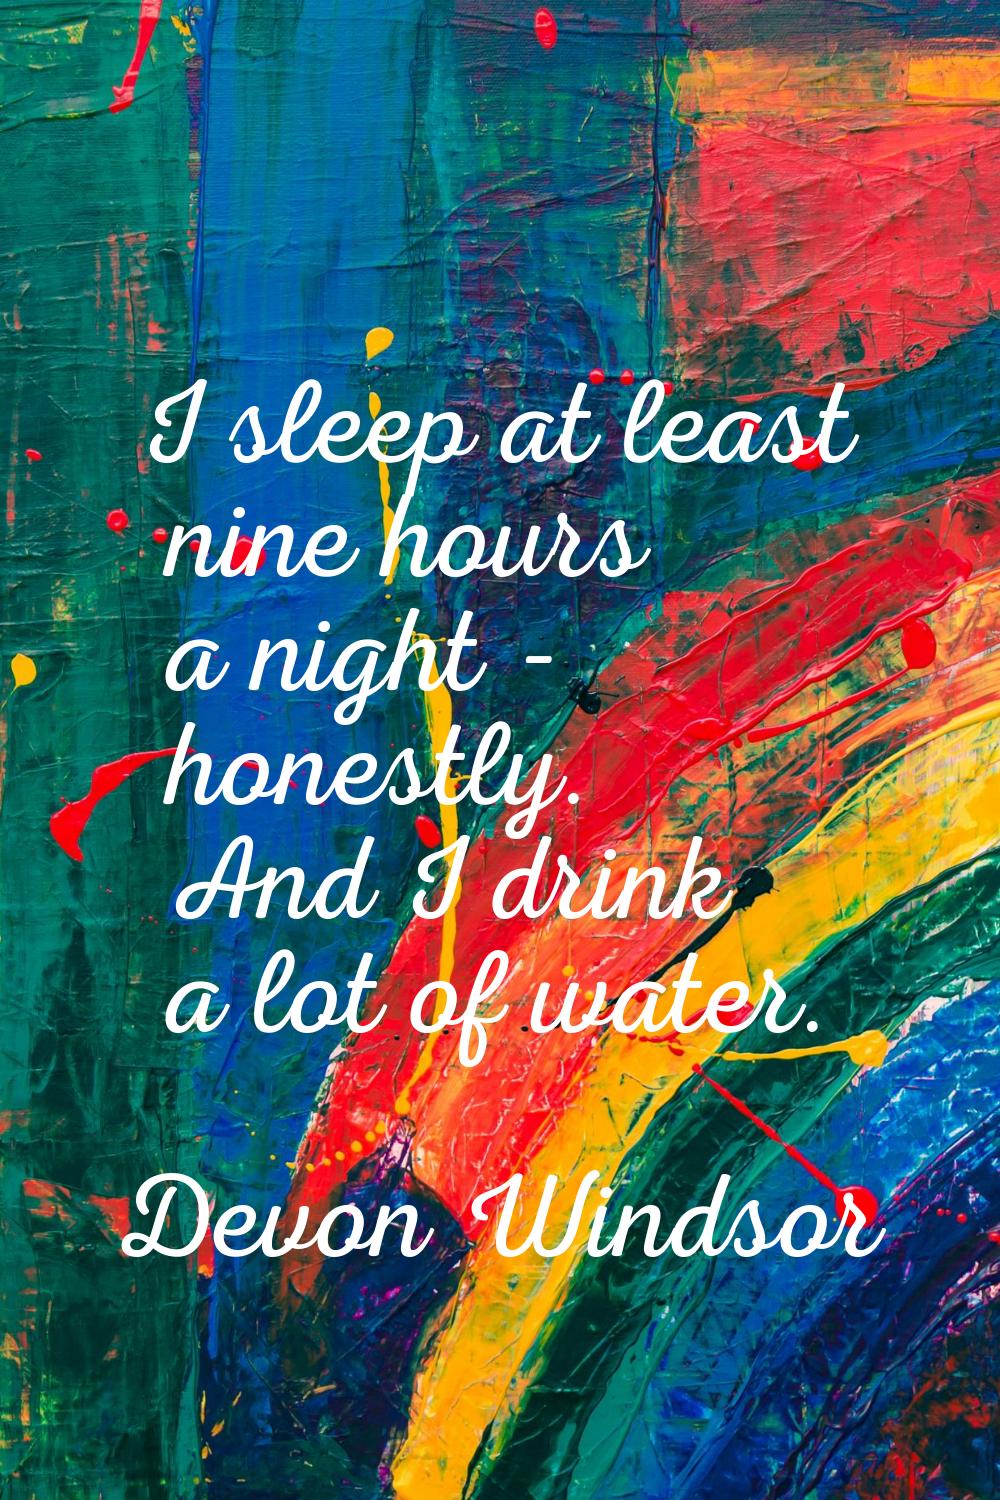 I sleep at least nine hours a night - honestly. And I drink a lot of water.